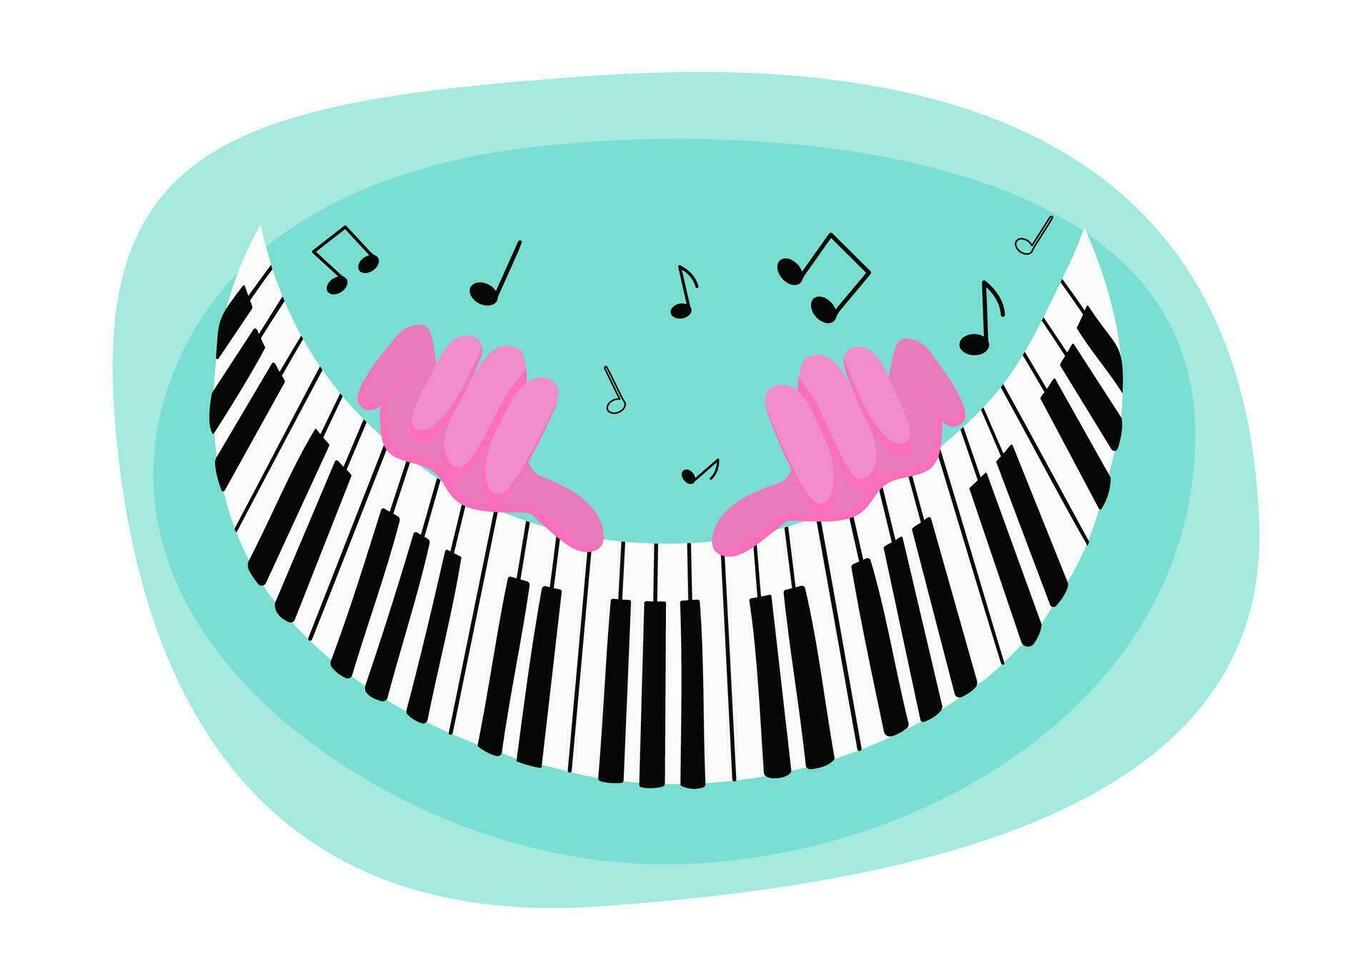 Hands and music. World piano day. Day of music. Keys of the piano, musical instrument. Play the piano. Musical performance, notes and signs. Vector illustration.